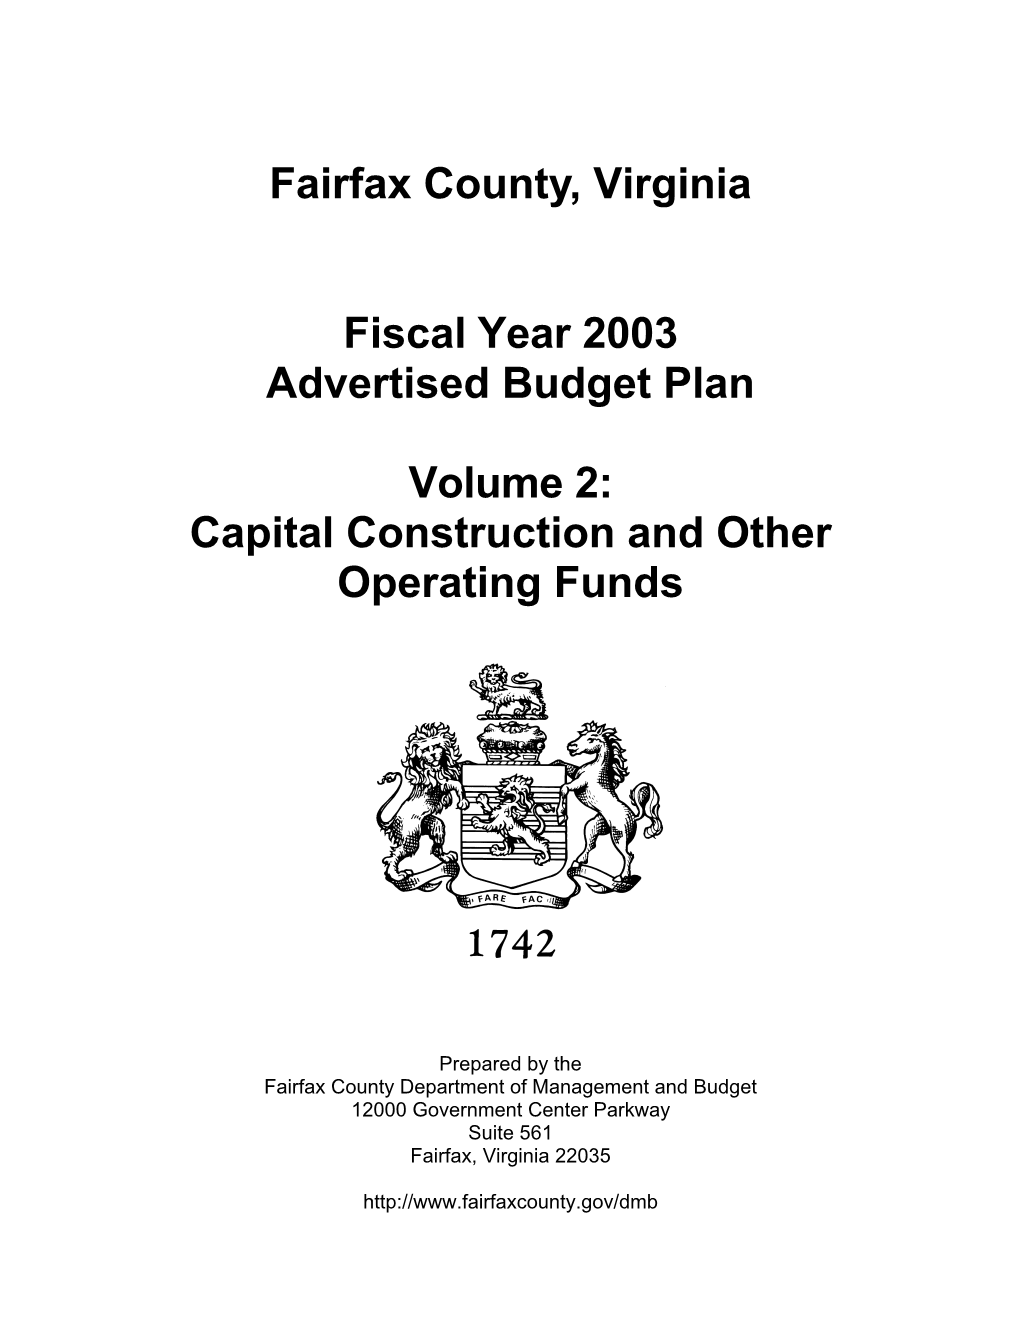 Volume 2: Capital Construction and Other Operating Funds (FY 2003